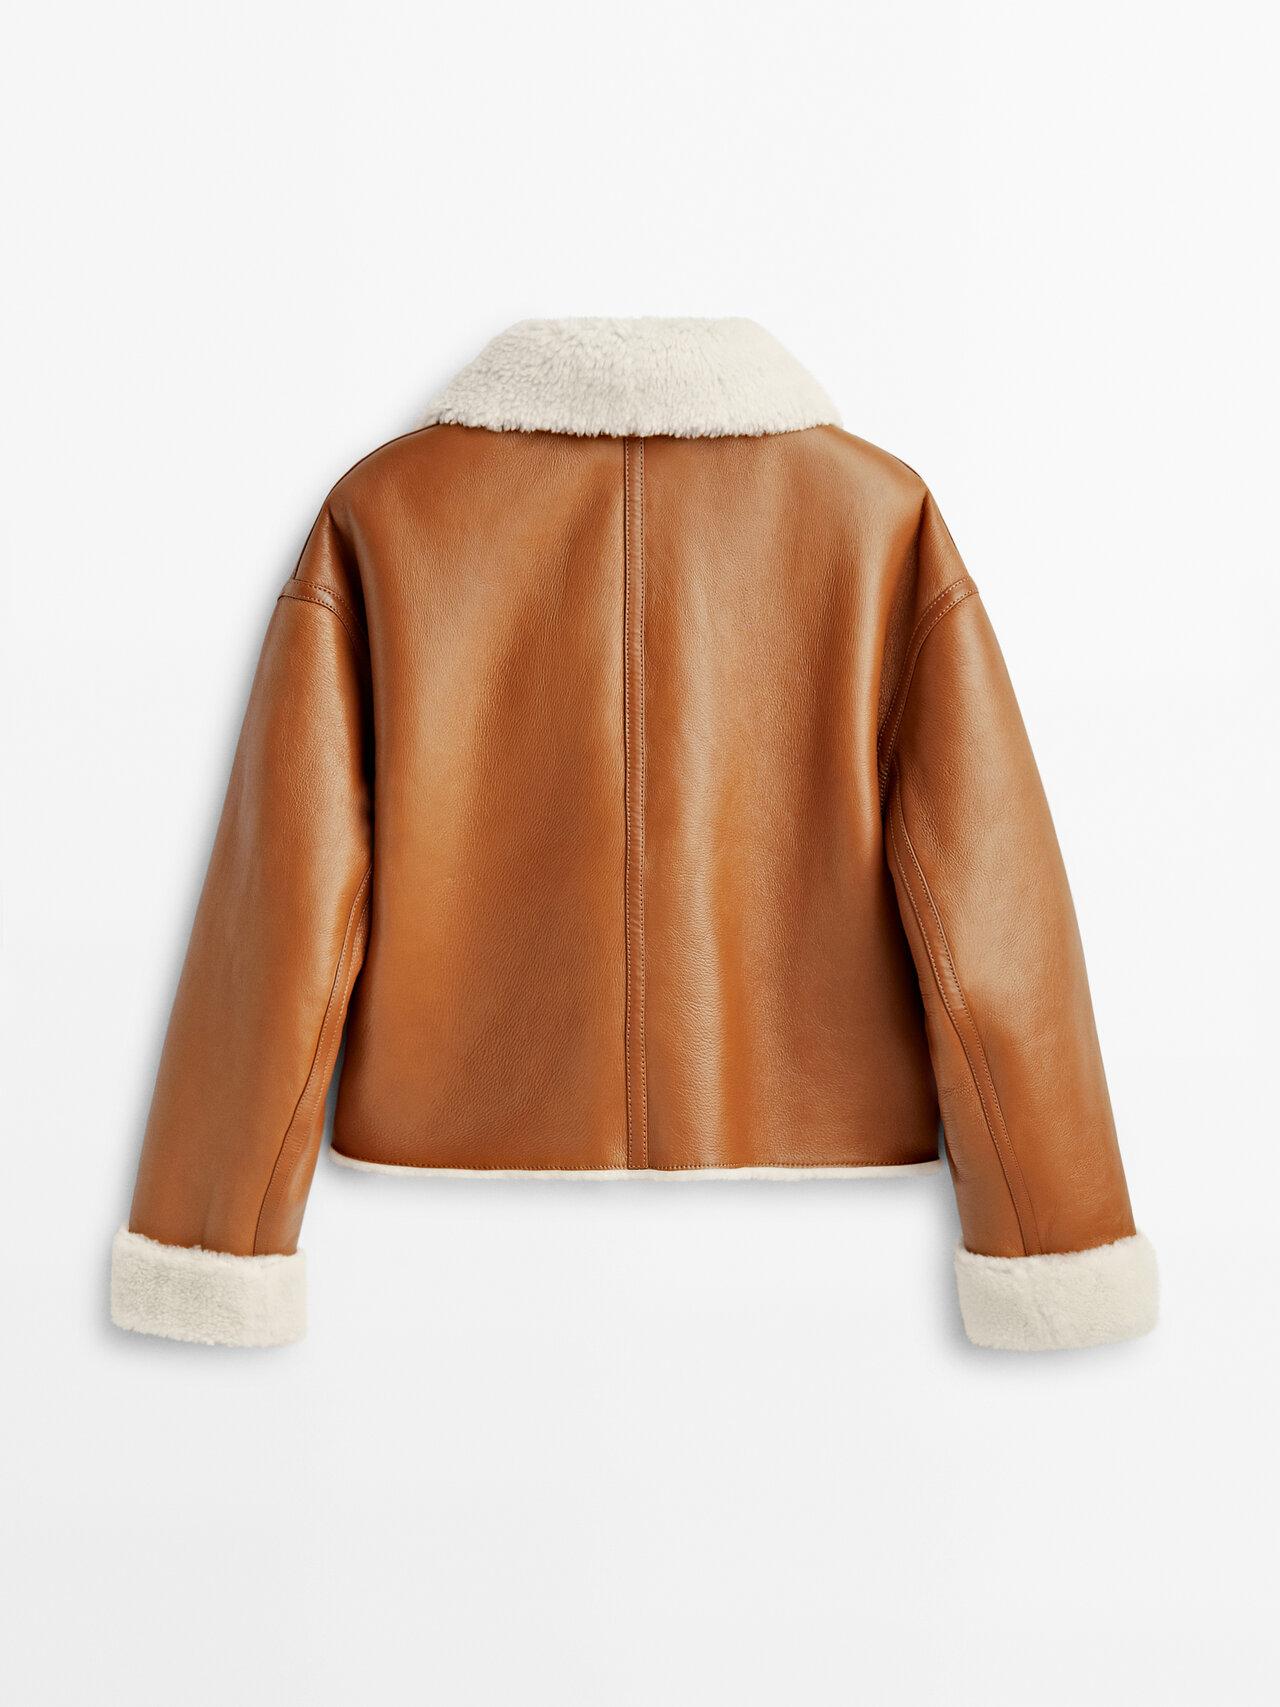 MASSIMO DUTTI Mouton Leather Jacket in Brown | Lyst